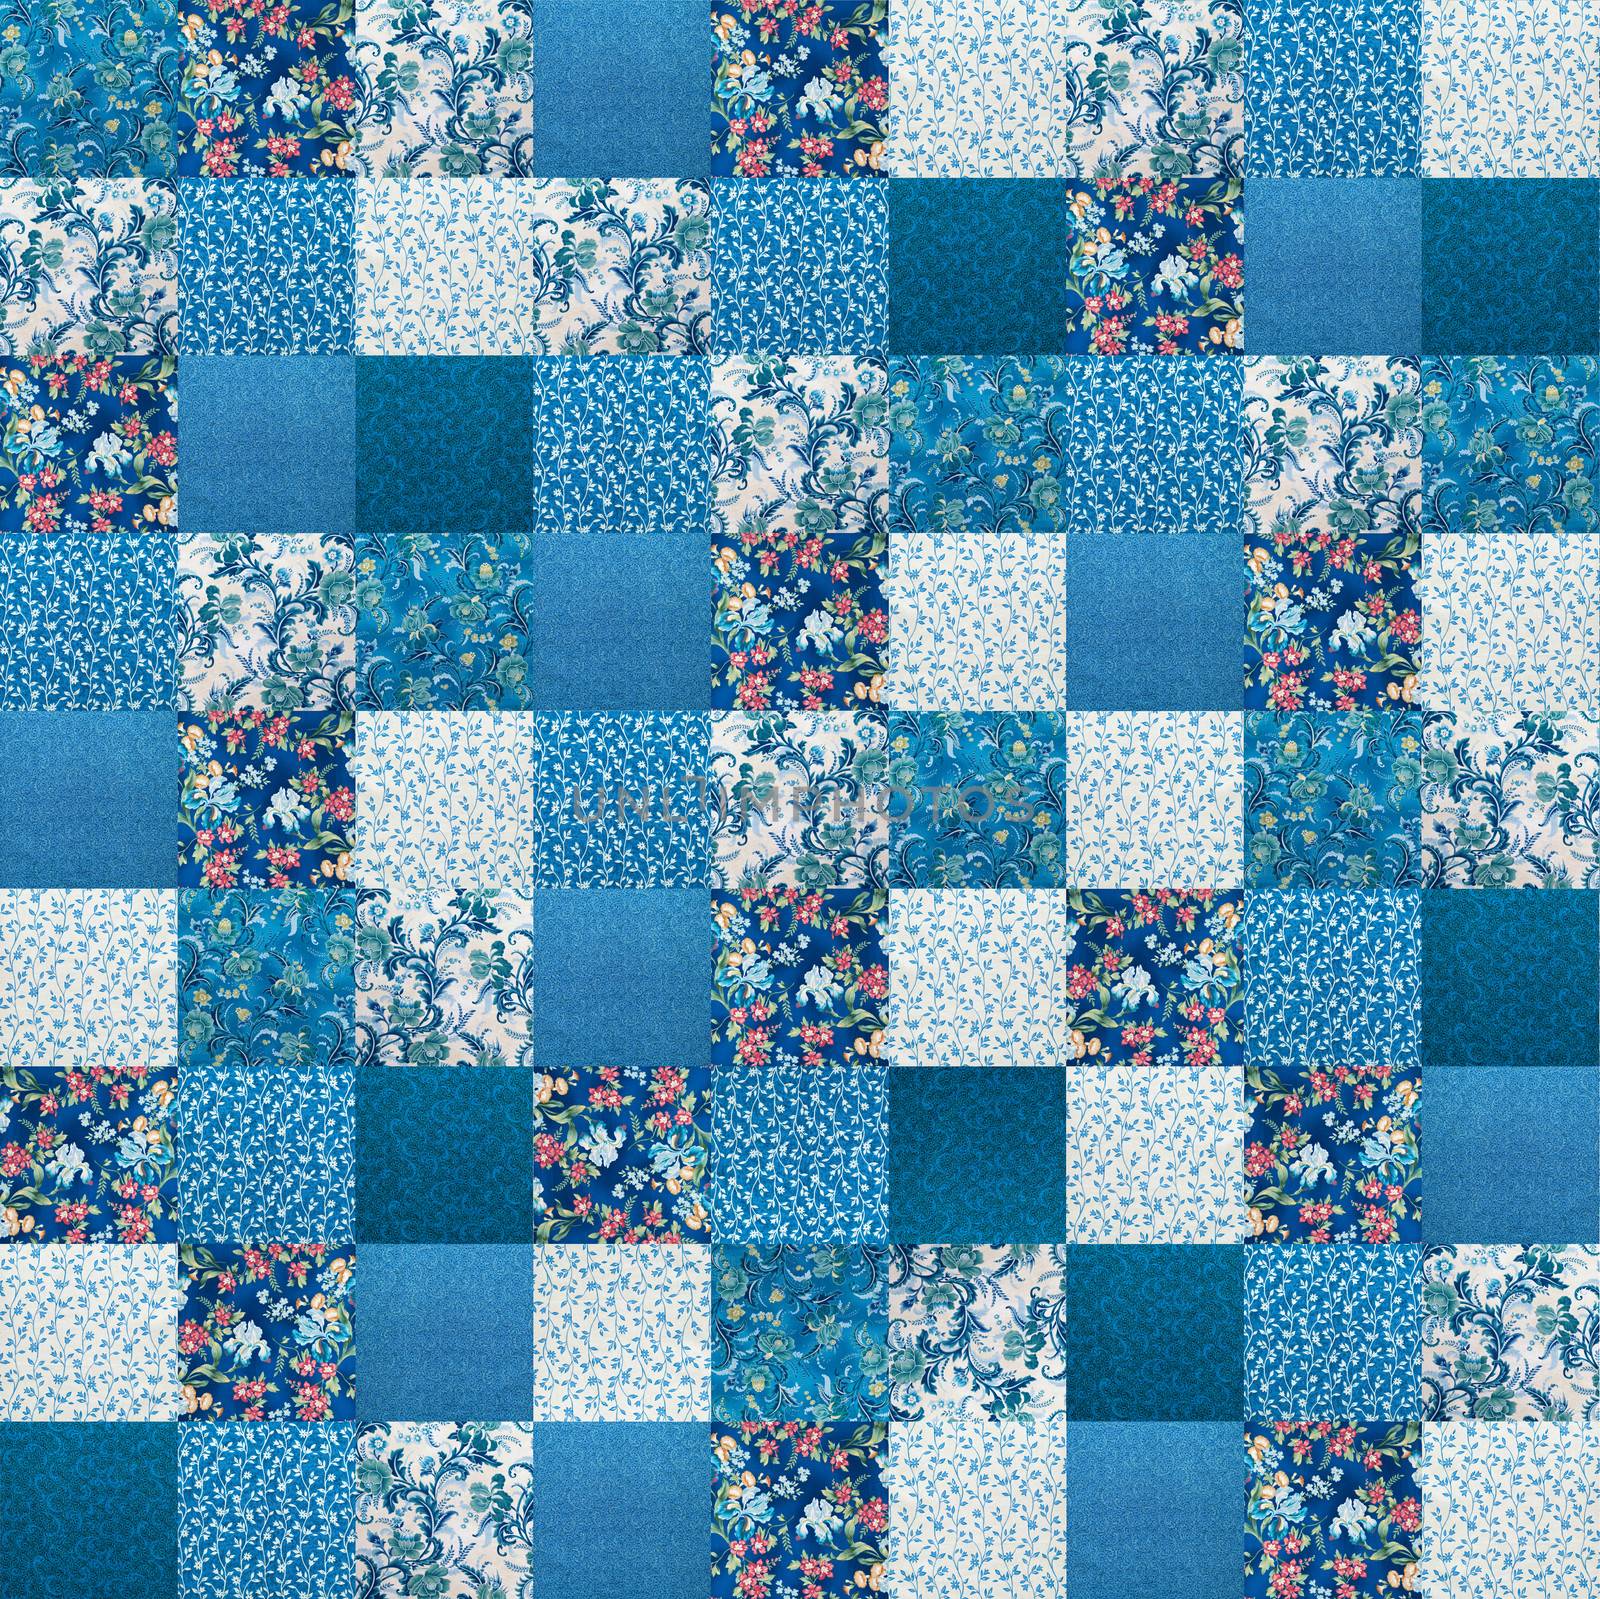 �razy quilt by andersonrise